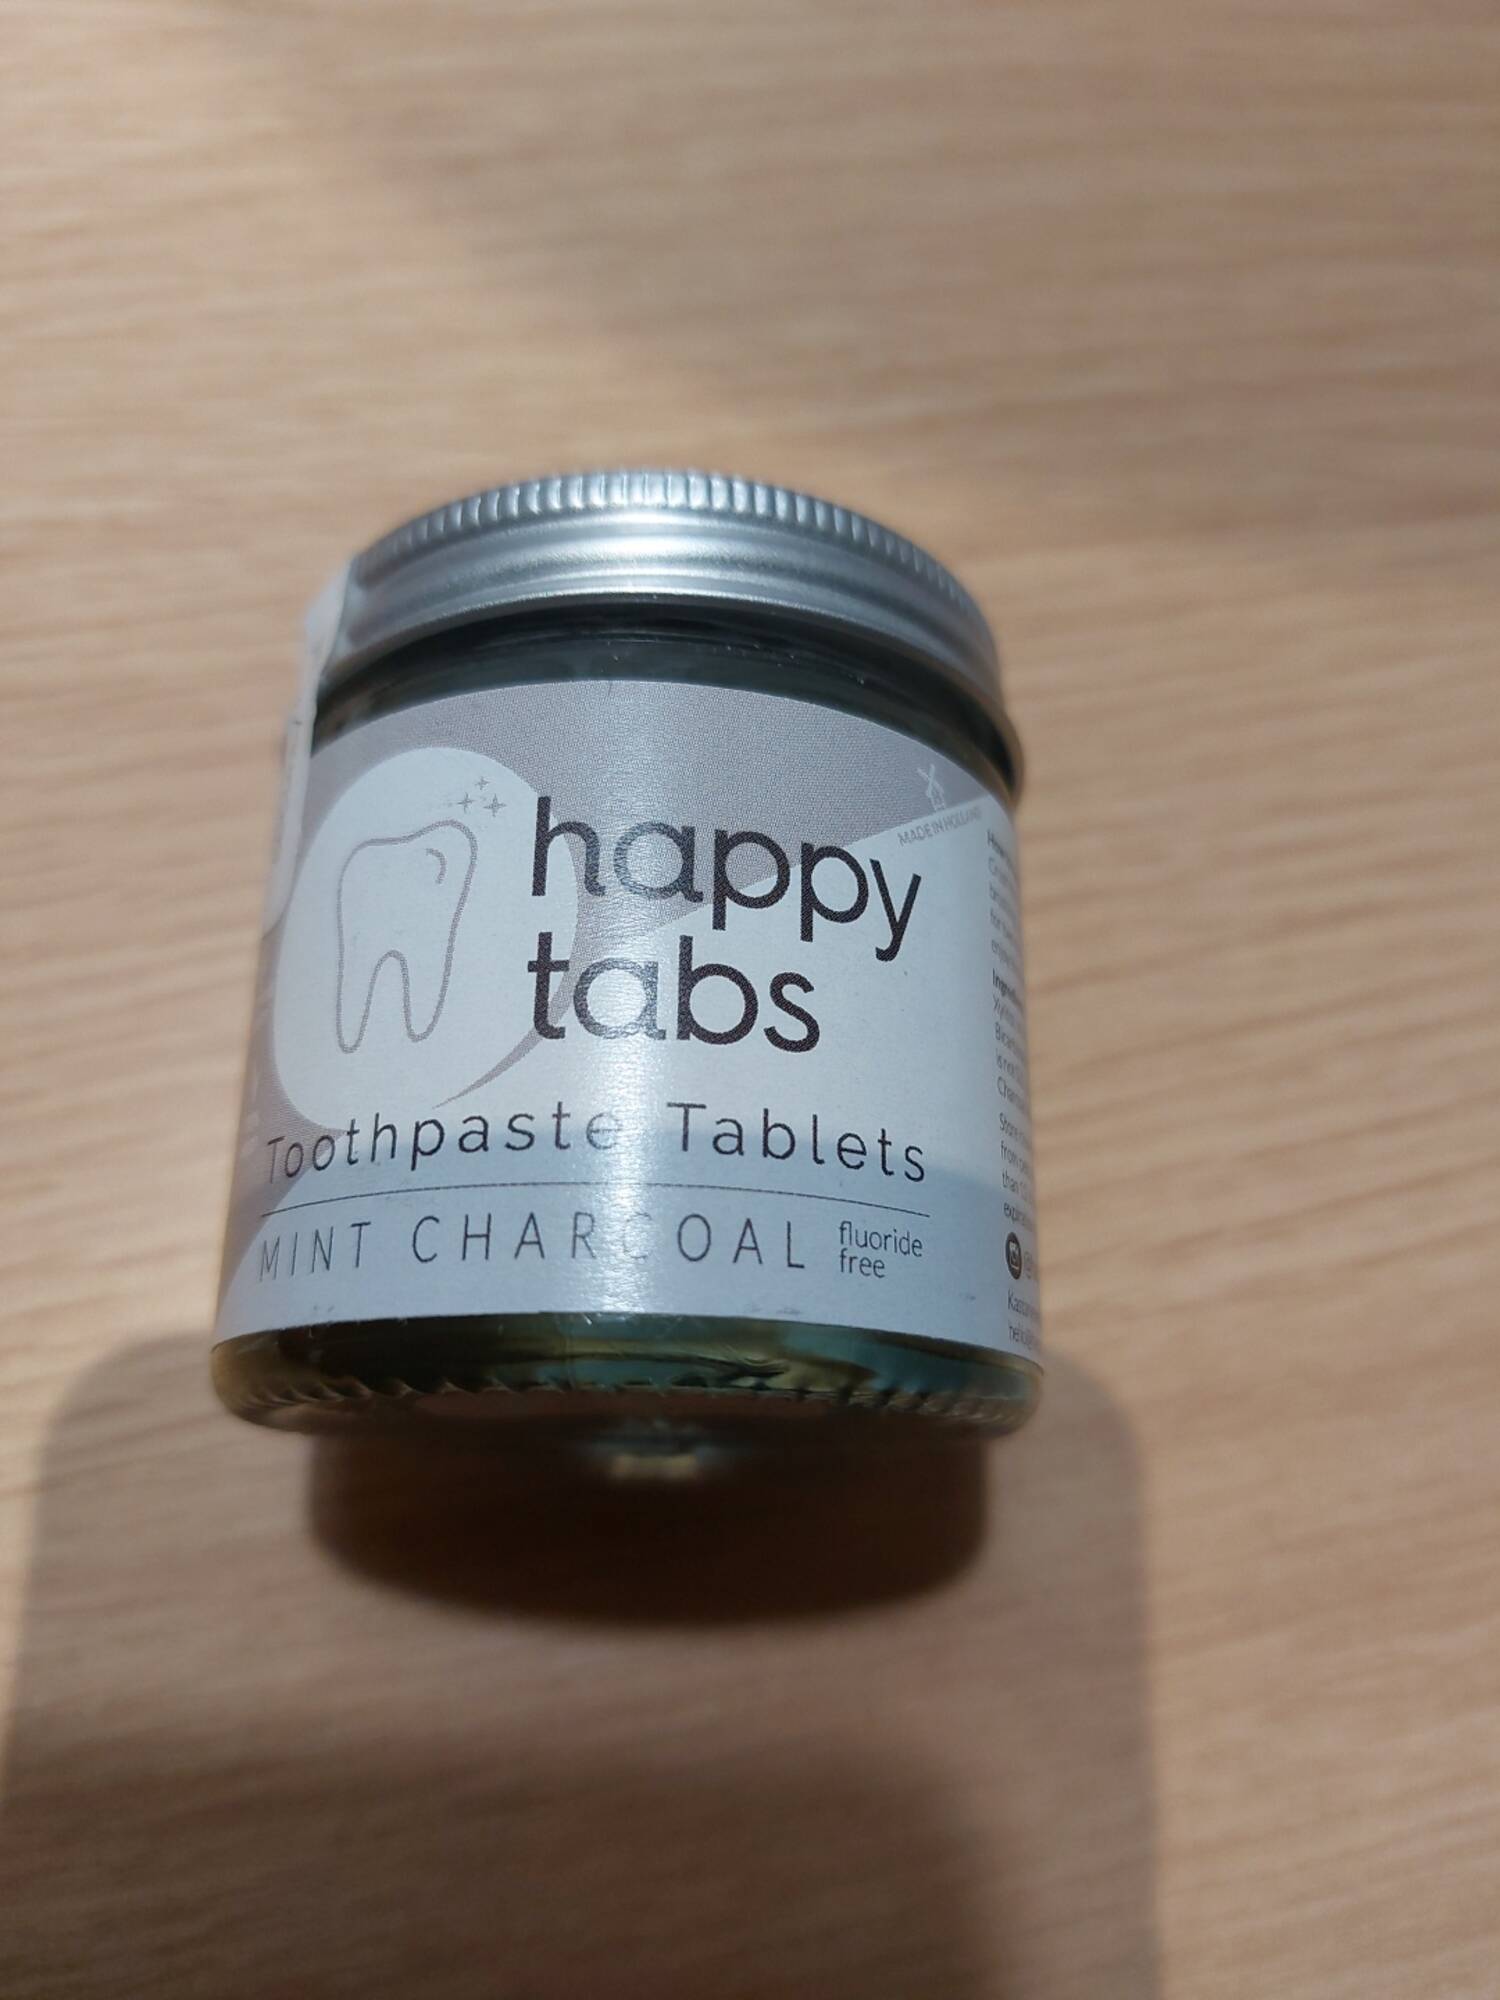 HAPPY TABS - Toophpaste tablets